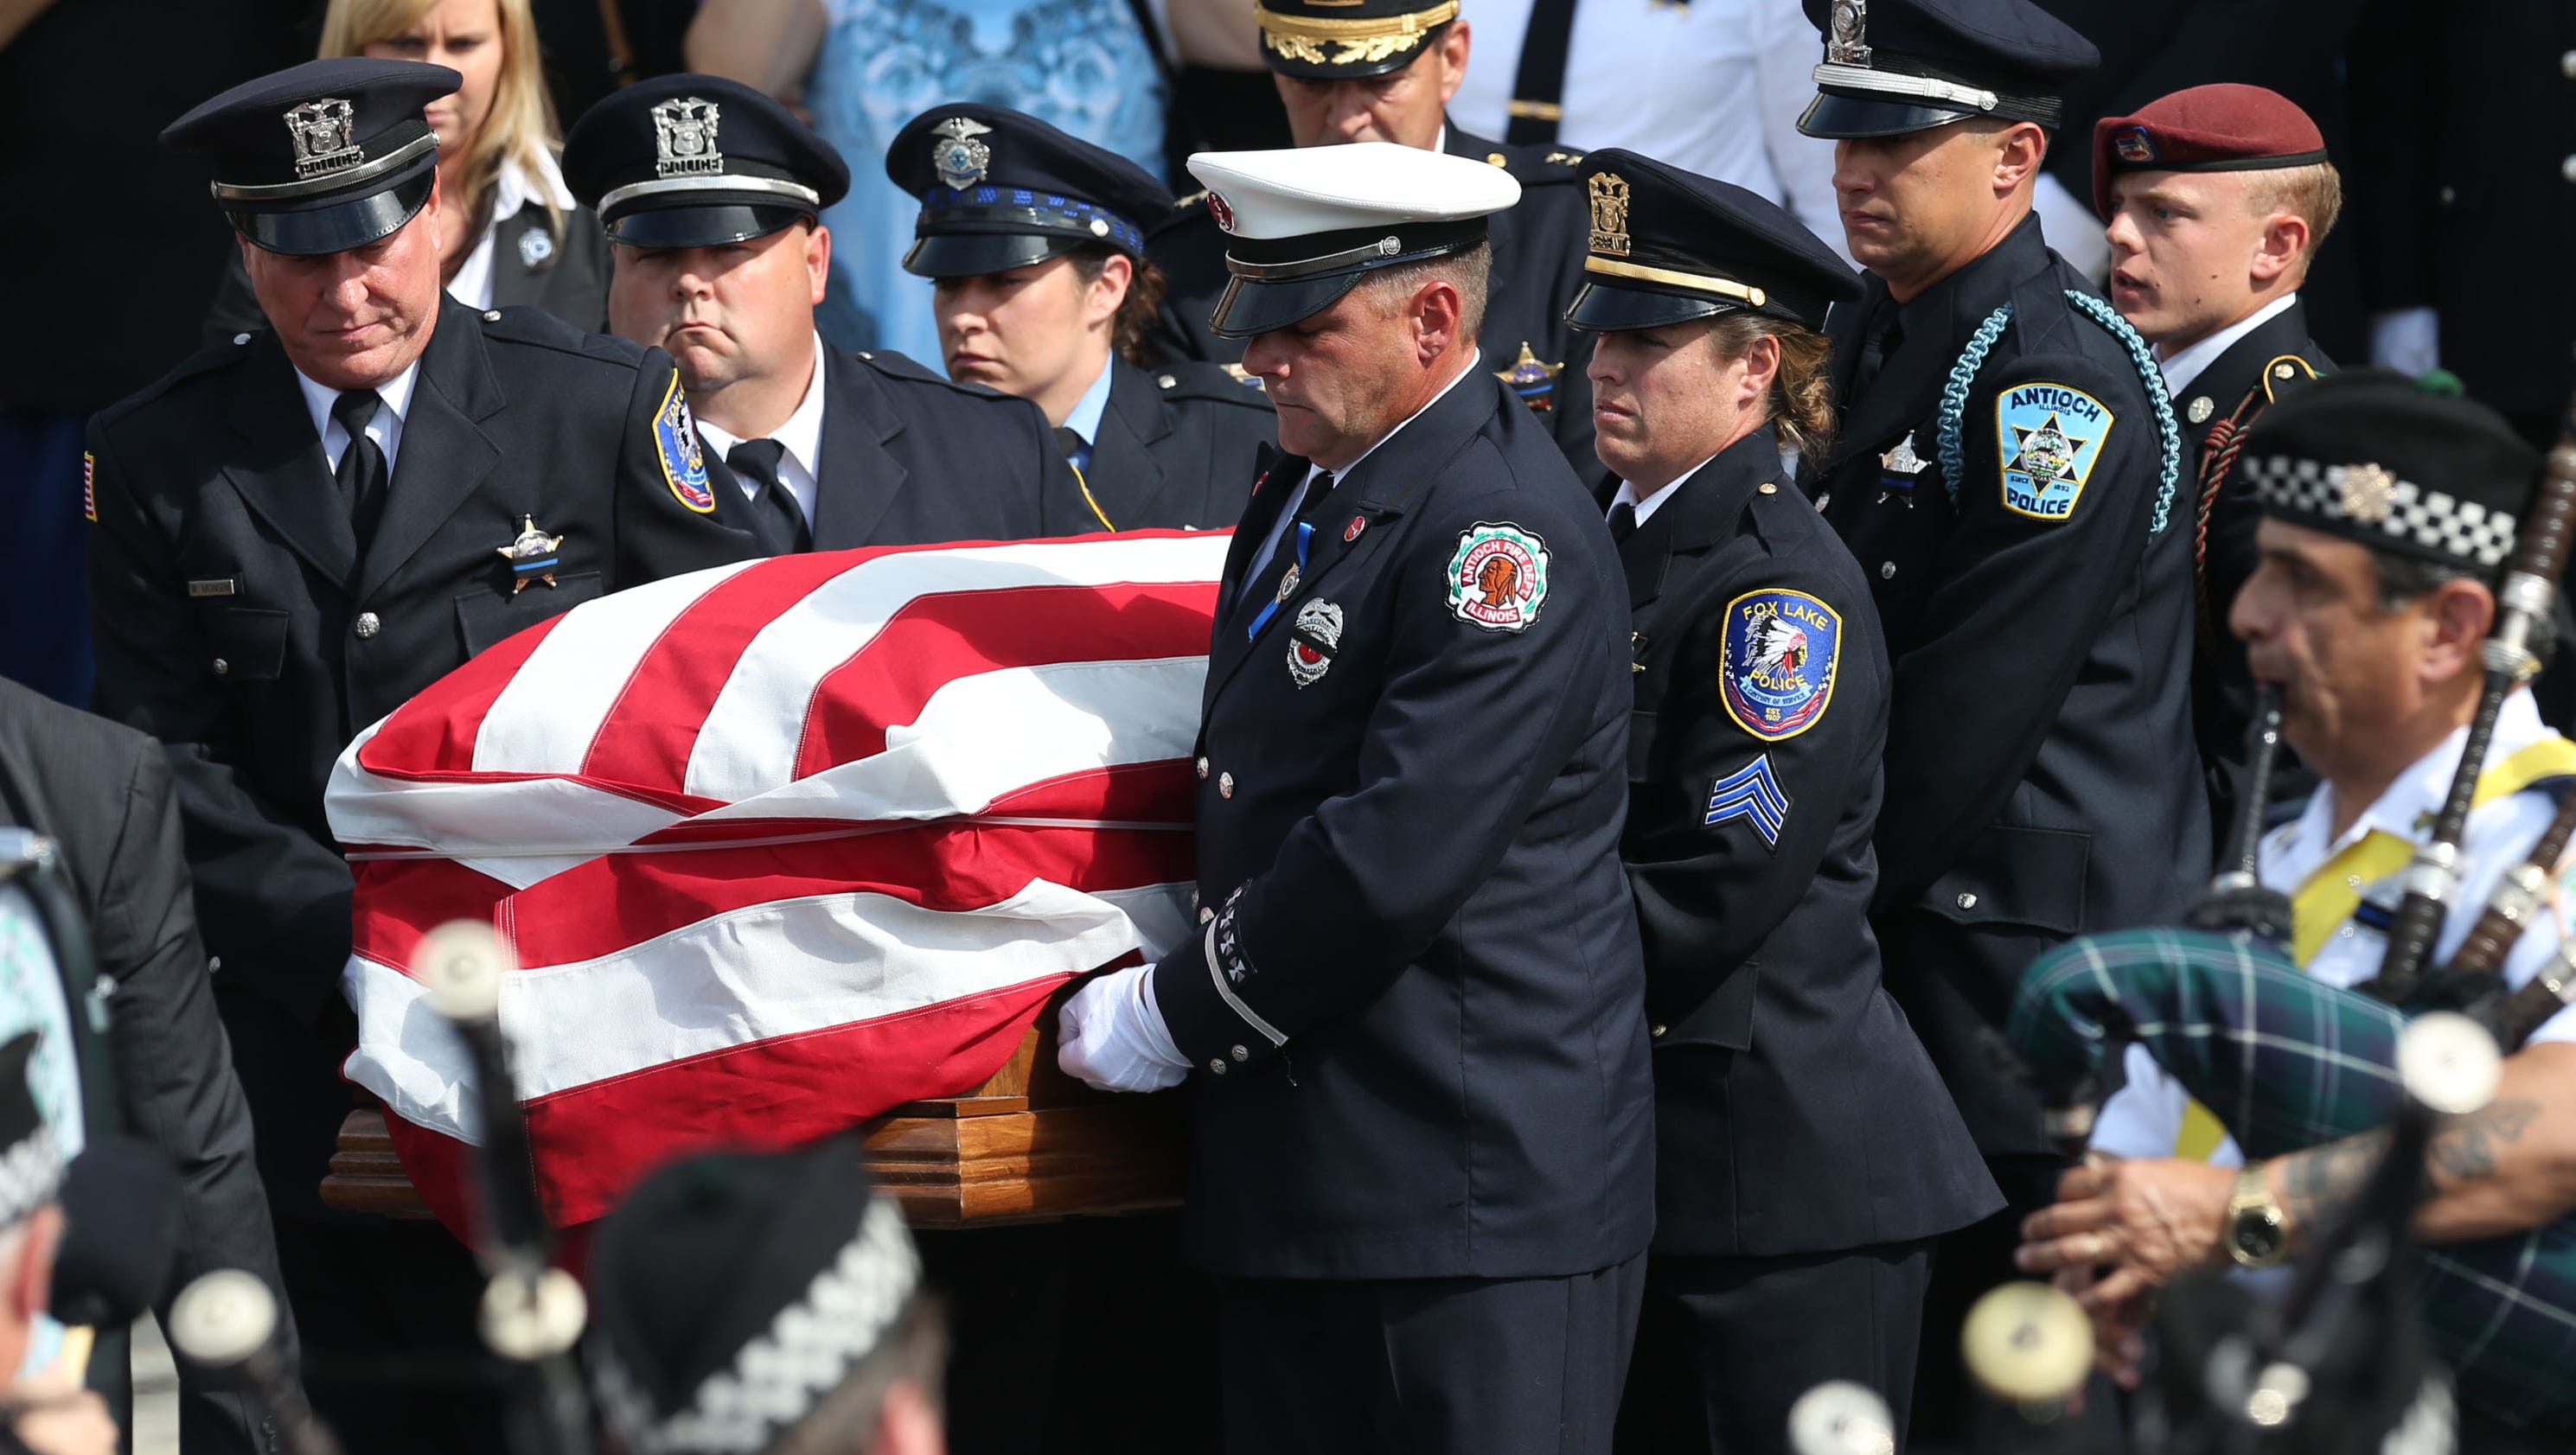 Funeral for slain police officer Lt. Charles Joseph Gliniewicz